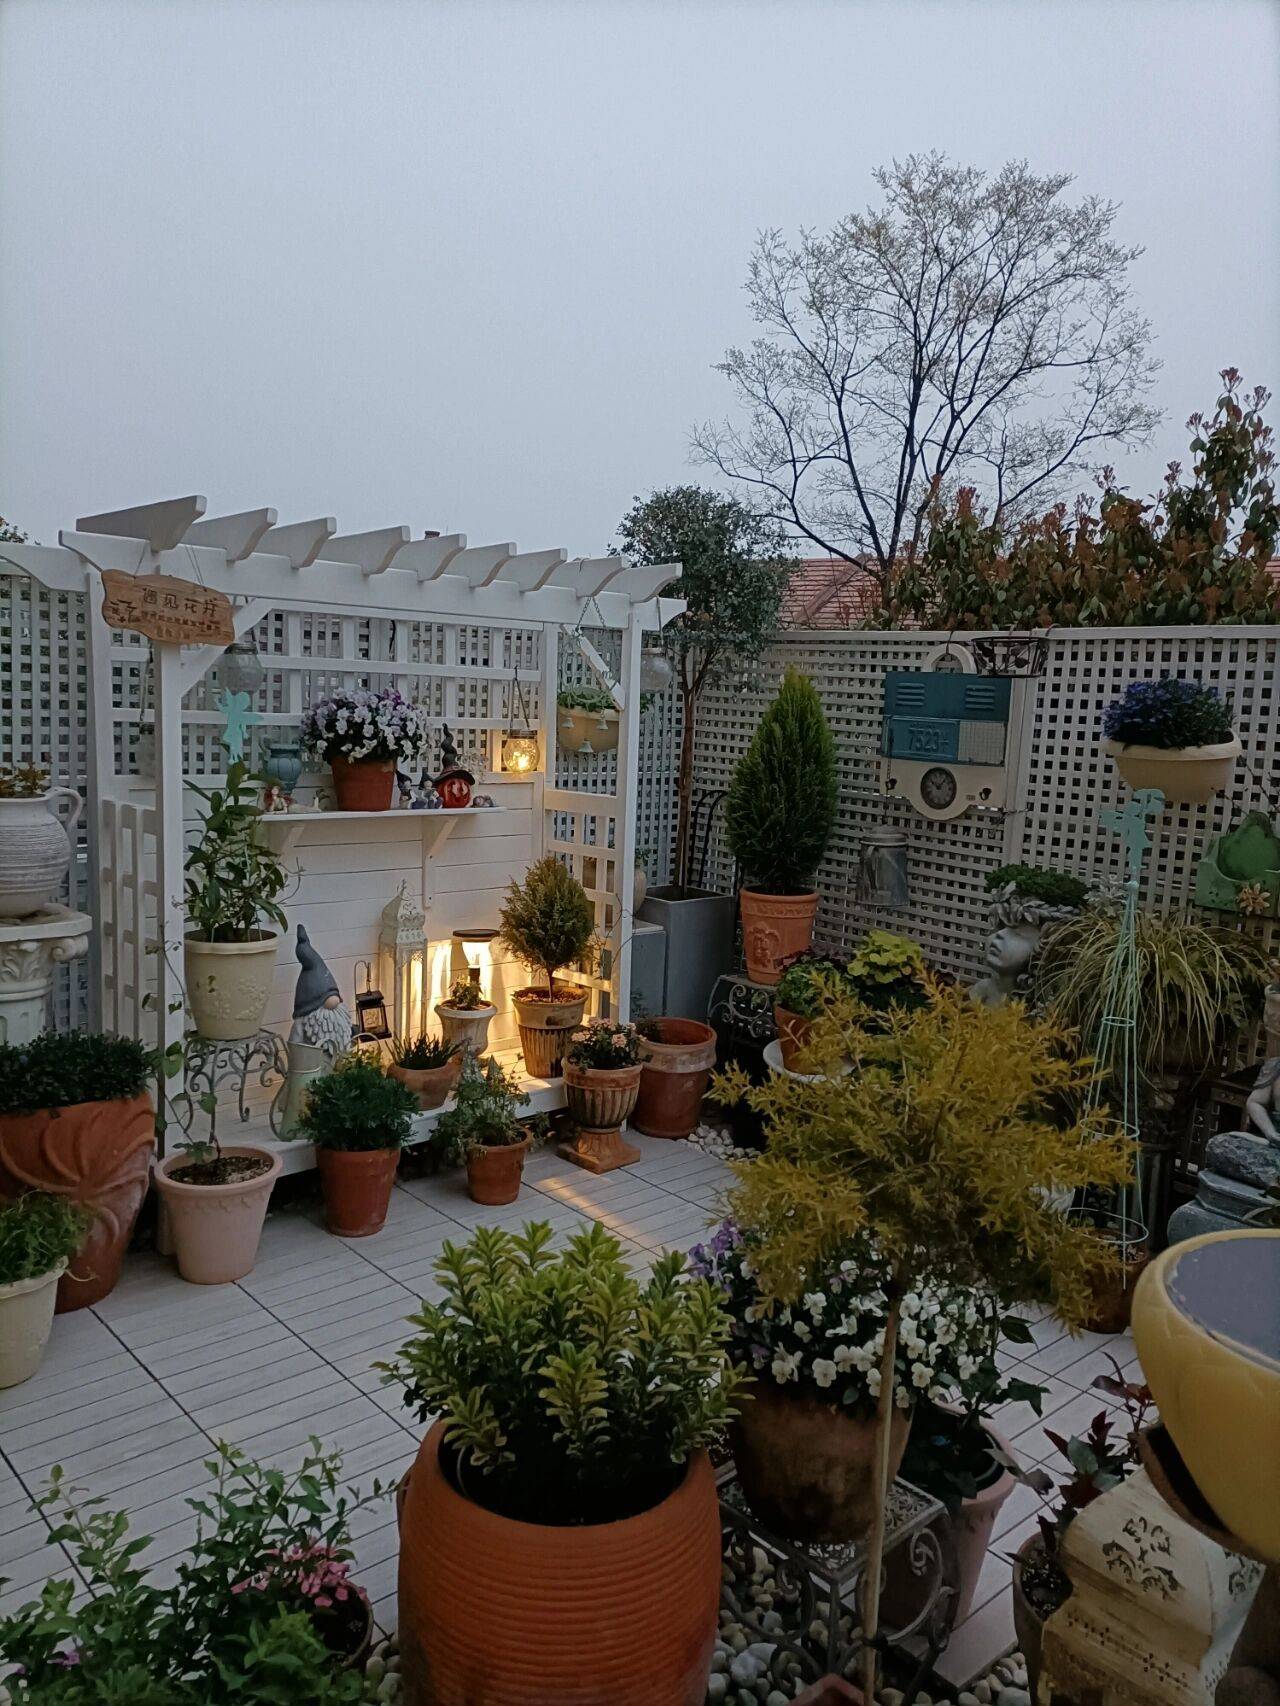 The 40m² terrace garden is hand-made by the city's mother from A to Z, making you watch from dawn to late at night and never get bored - Photo 17.